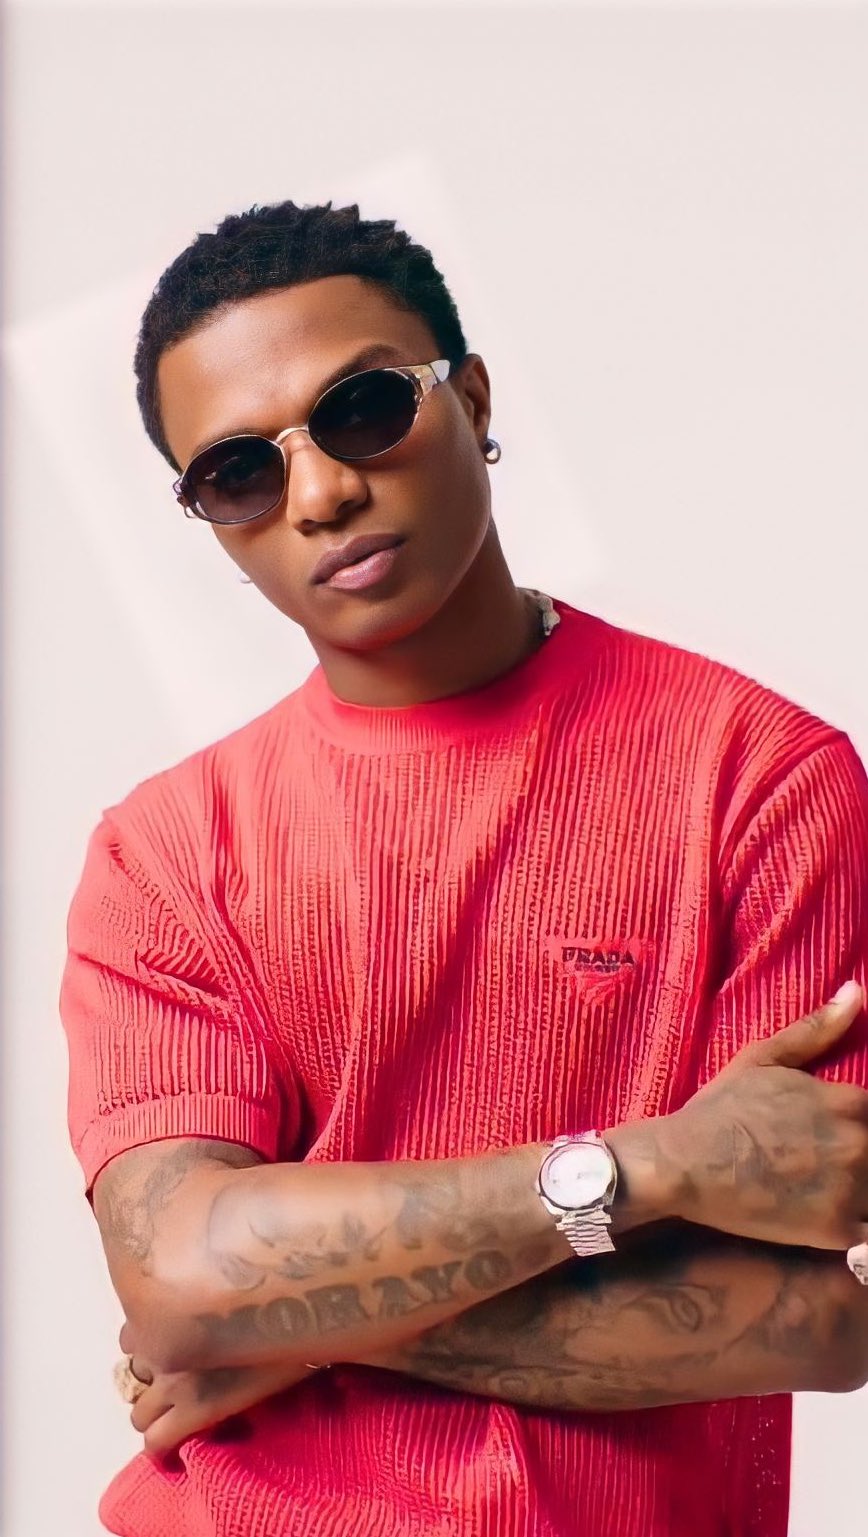 Deep facts on Wizkid not showing up in Ghana Live Concert